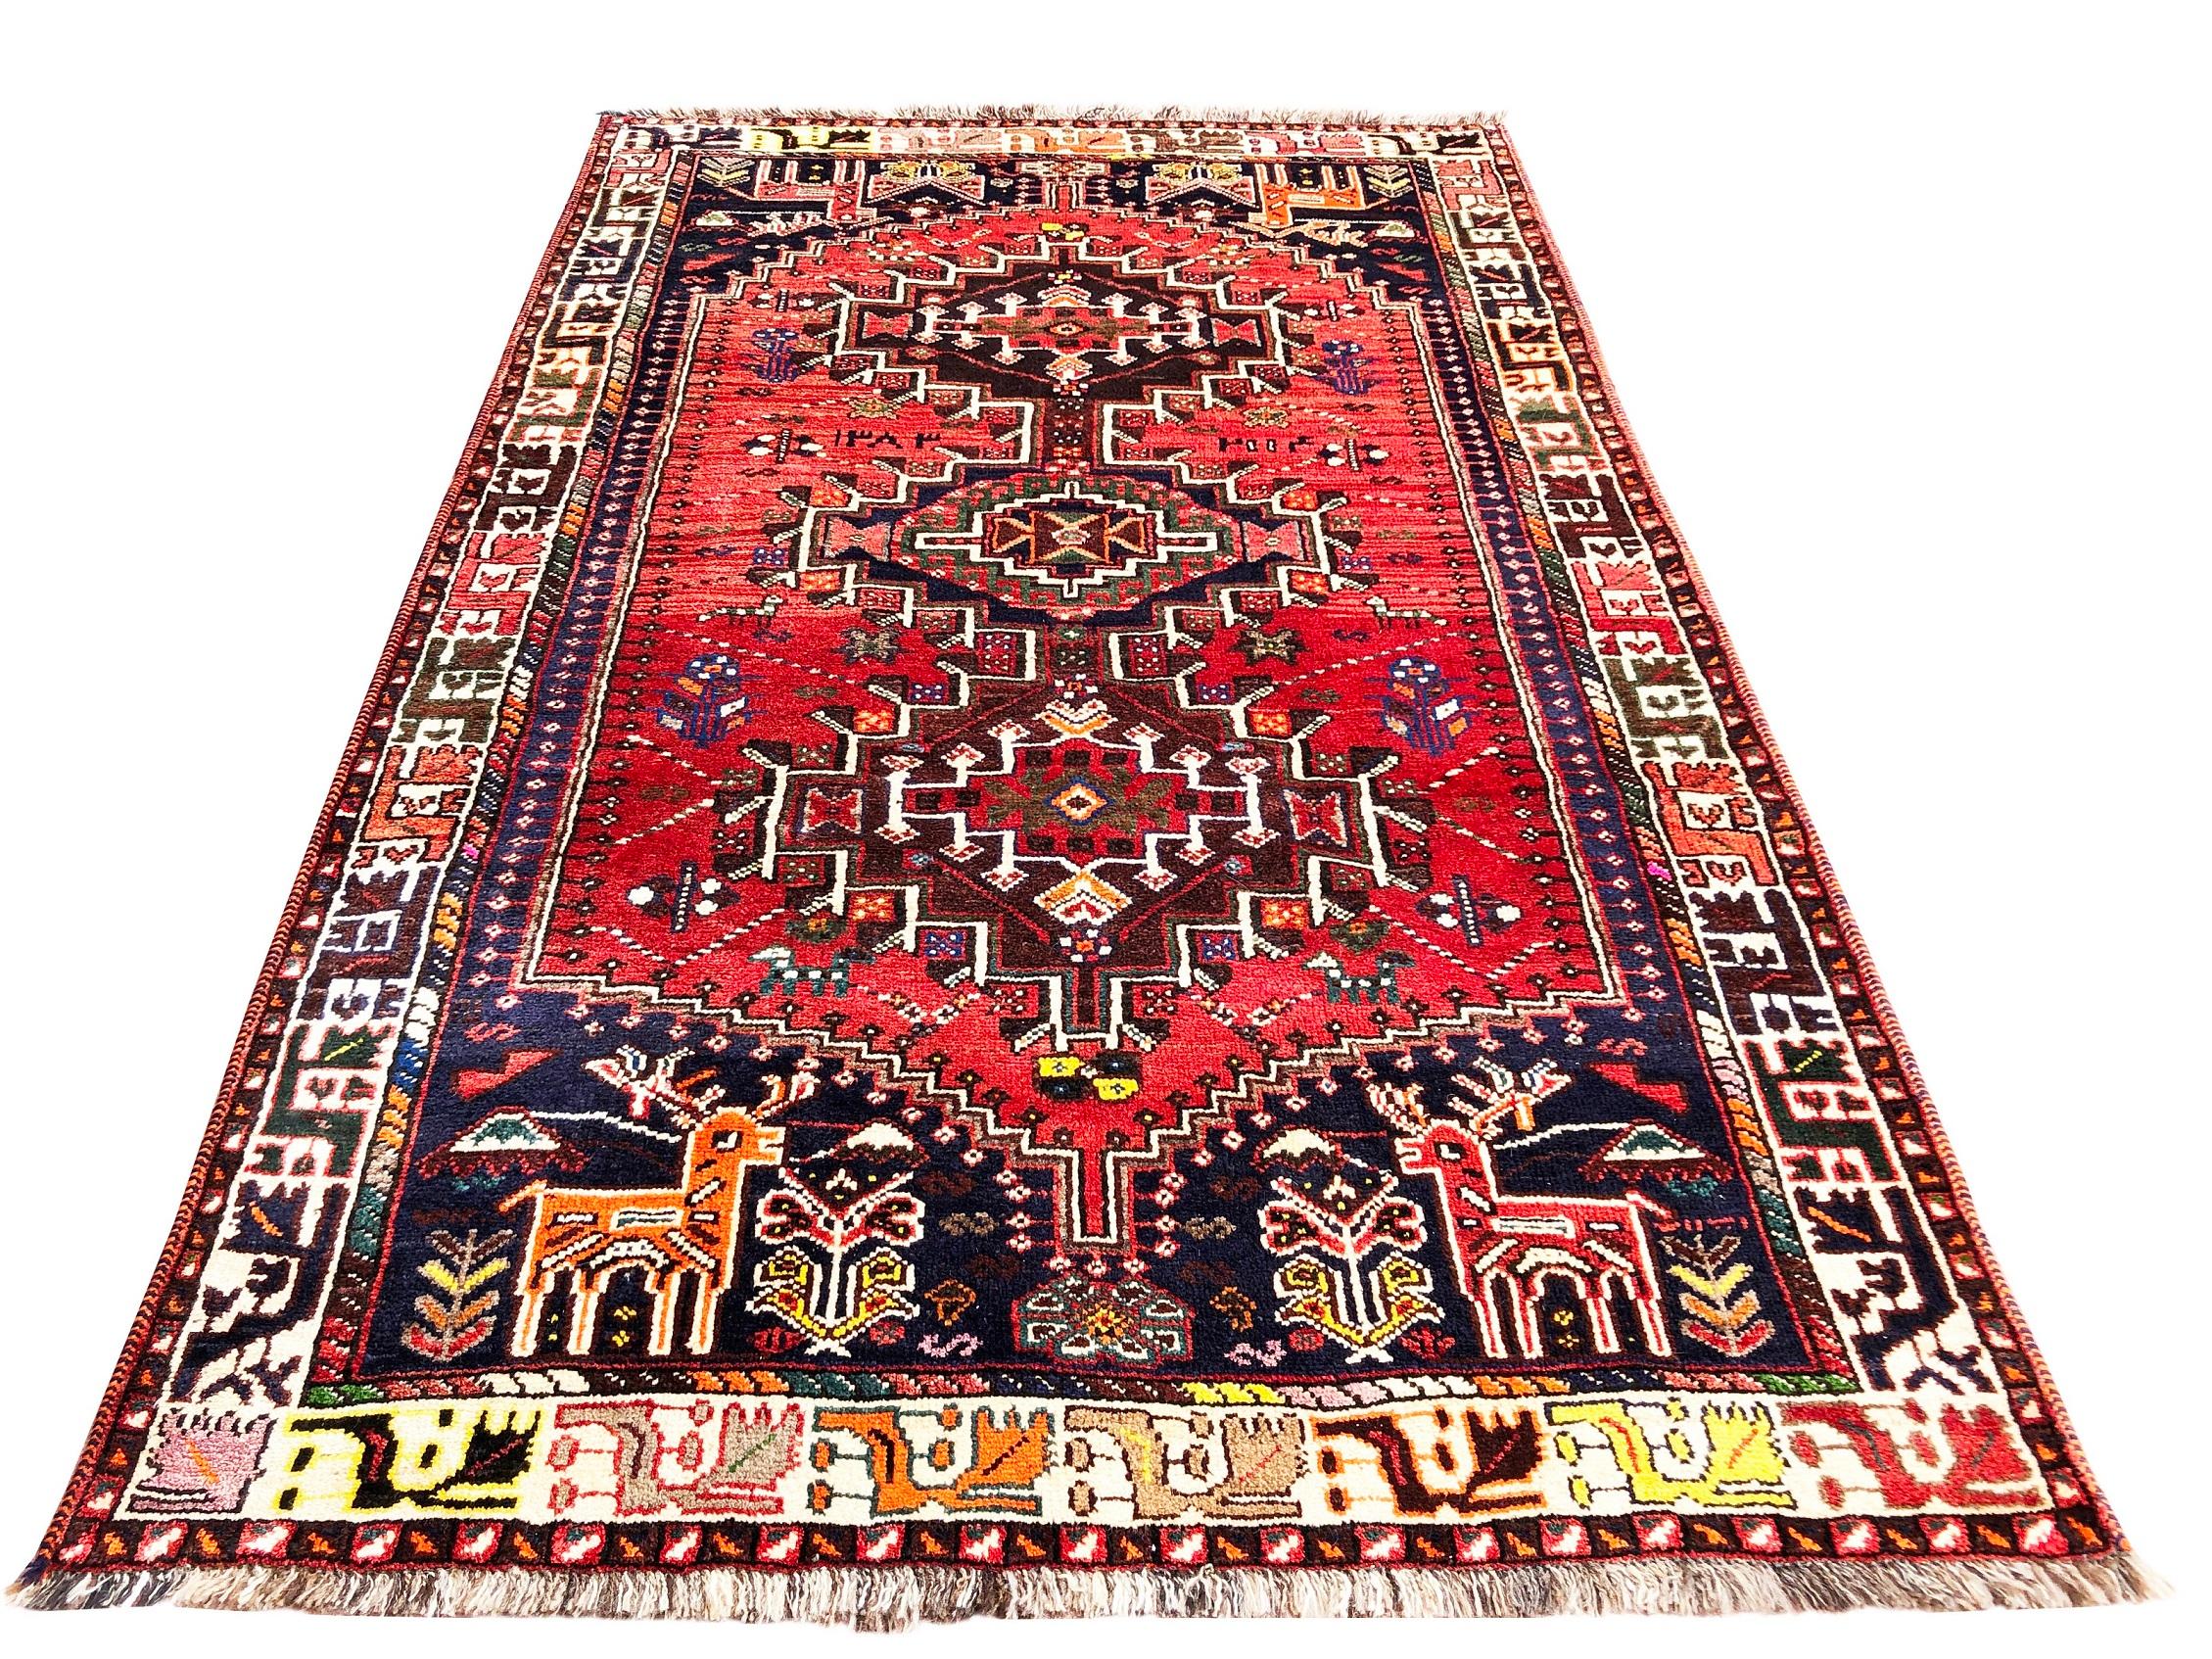 This rug is an authentic rug from Iran, Shiraz. The pile and foundation are wool. The base color is a vibrant red field with accents of bright orange, yellow, blue and green throughout with cream and multi border color. The design is geometric with